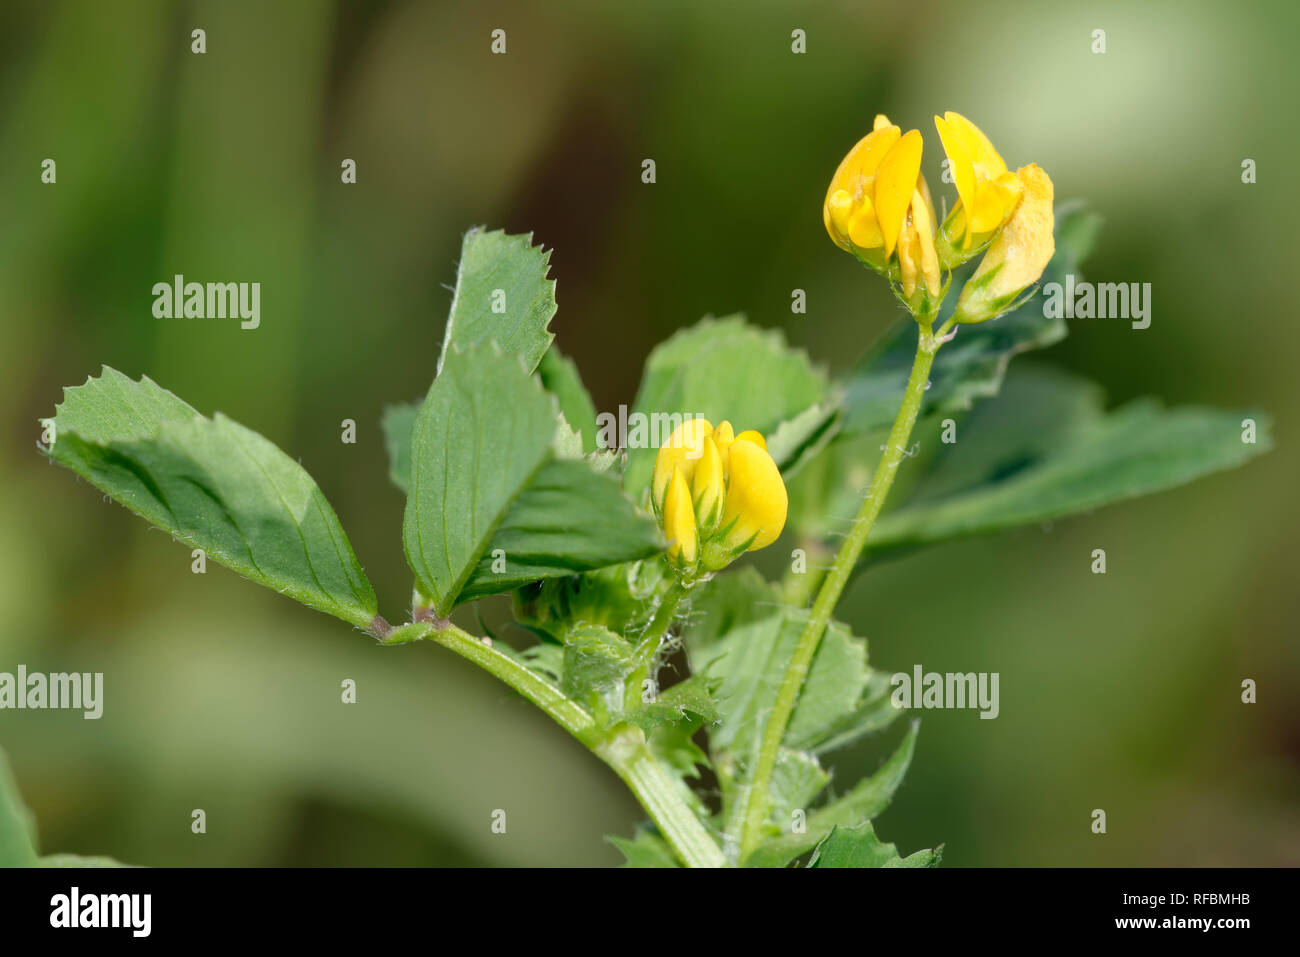 Spotted Medick - Medicago arabica Small Pea Flower Stock Photo